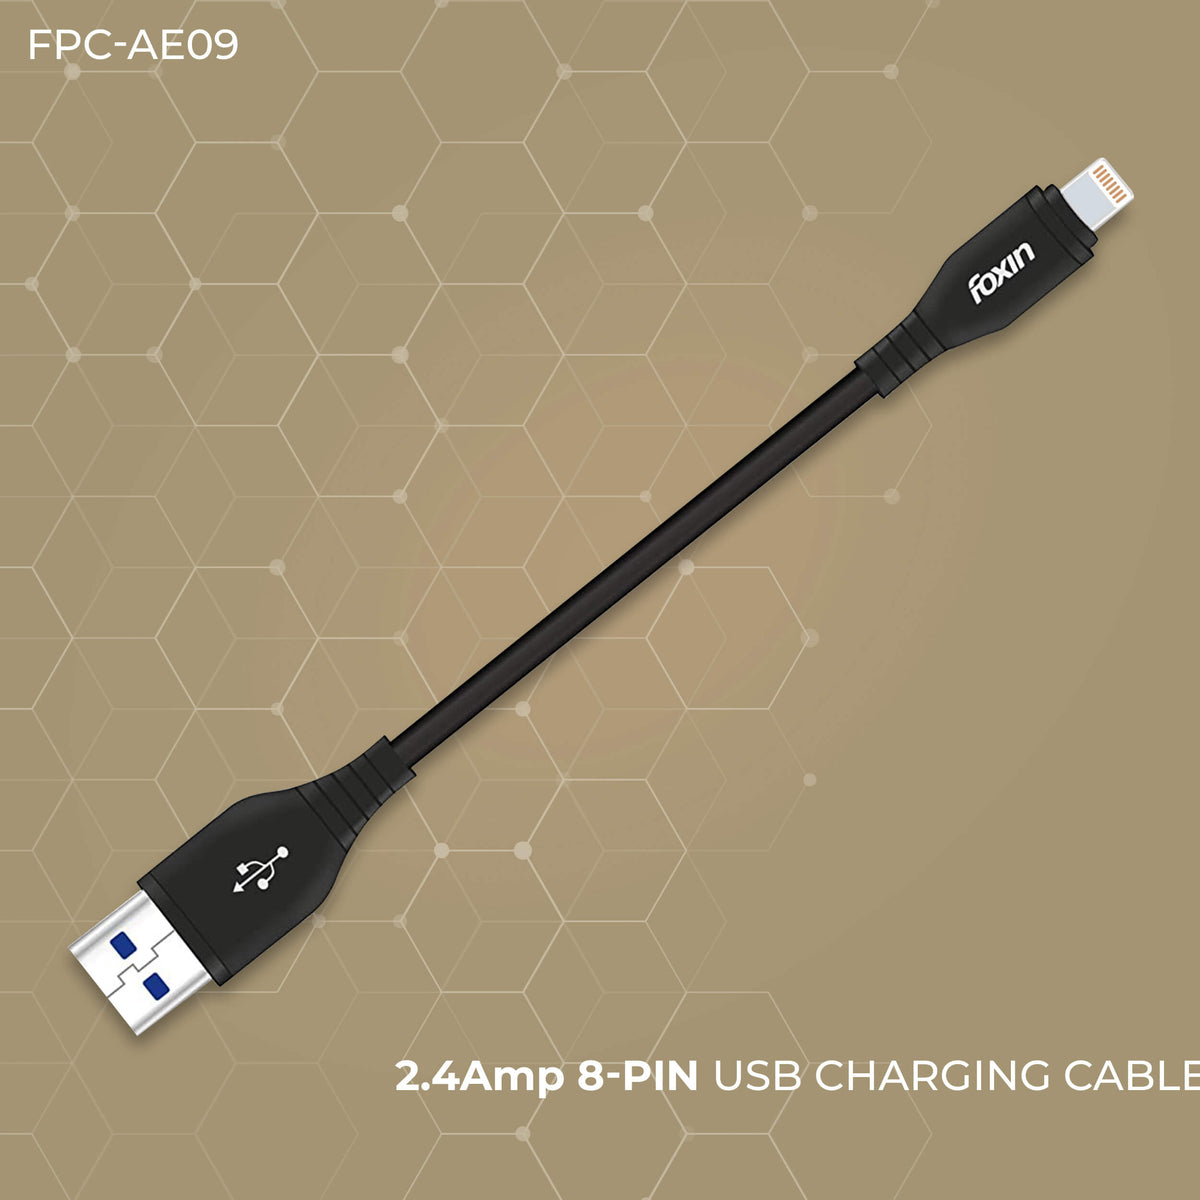 Foxin AE09 8 Pin USB Power Bank Cable